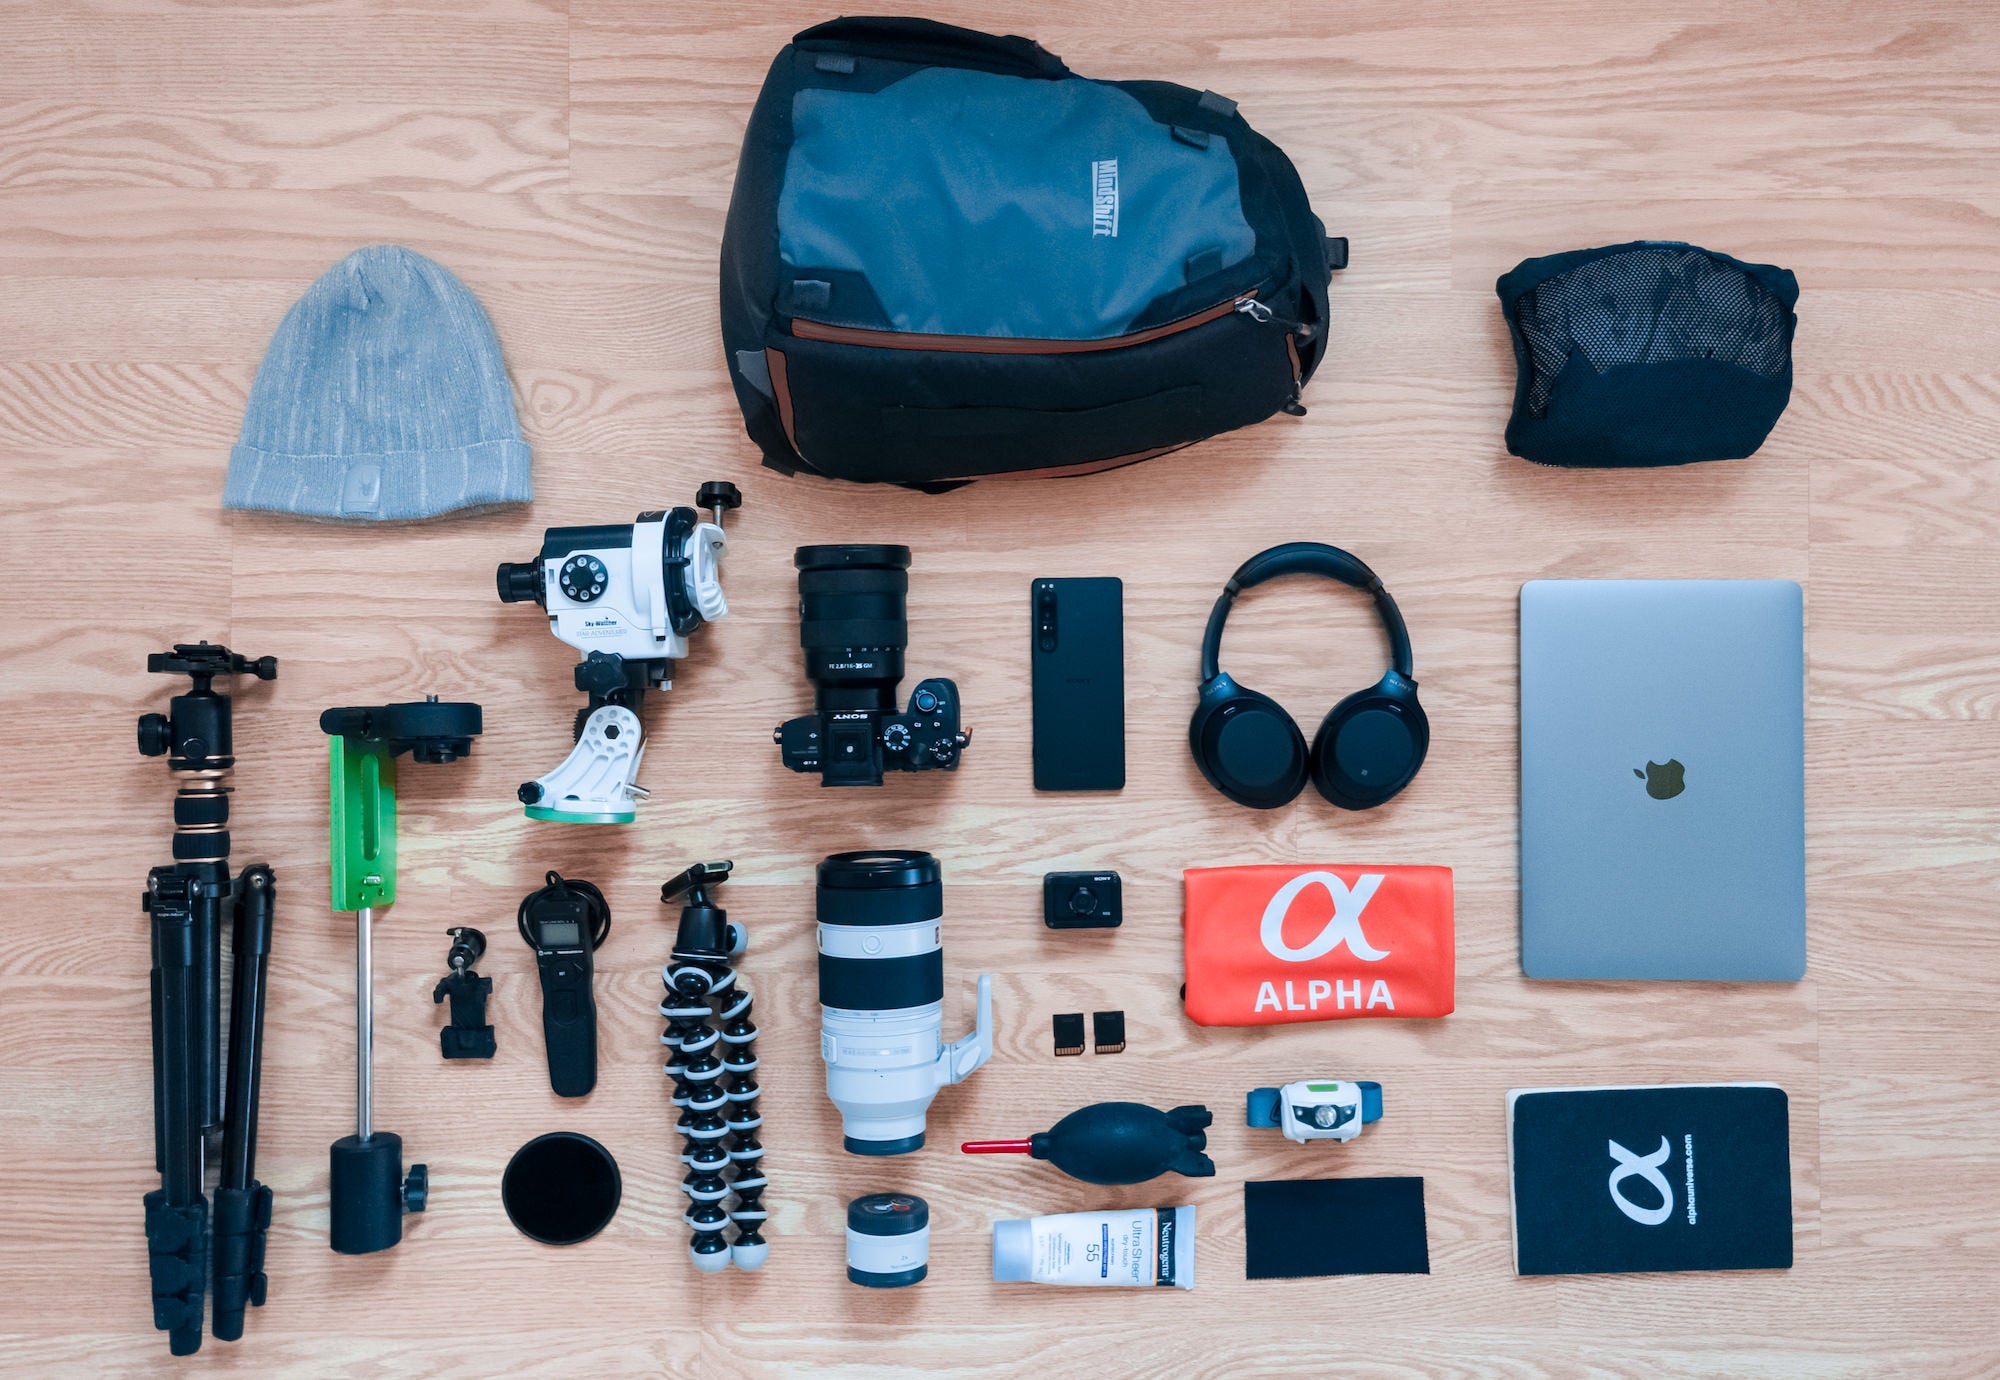 Jason Frankle's Sony kit for content creation